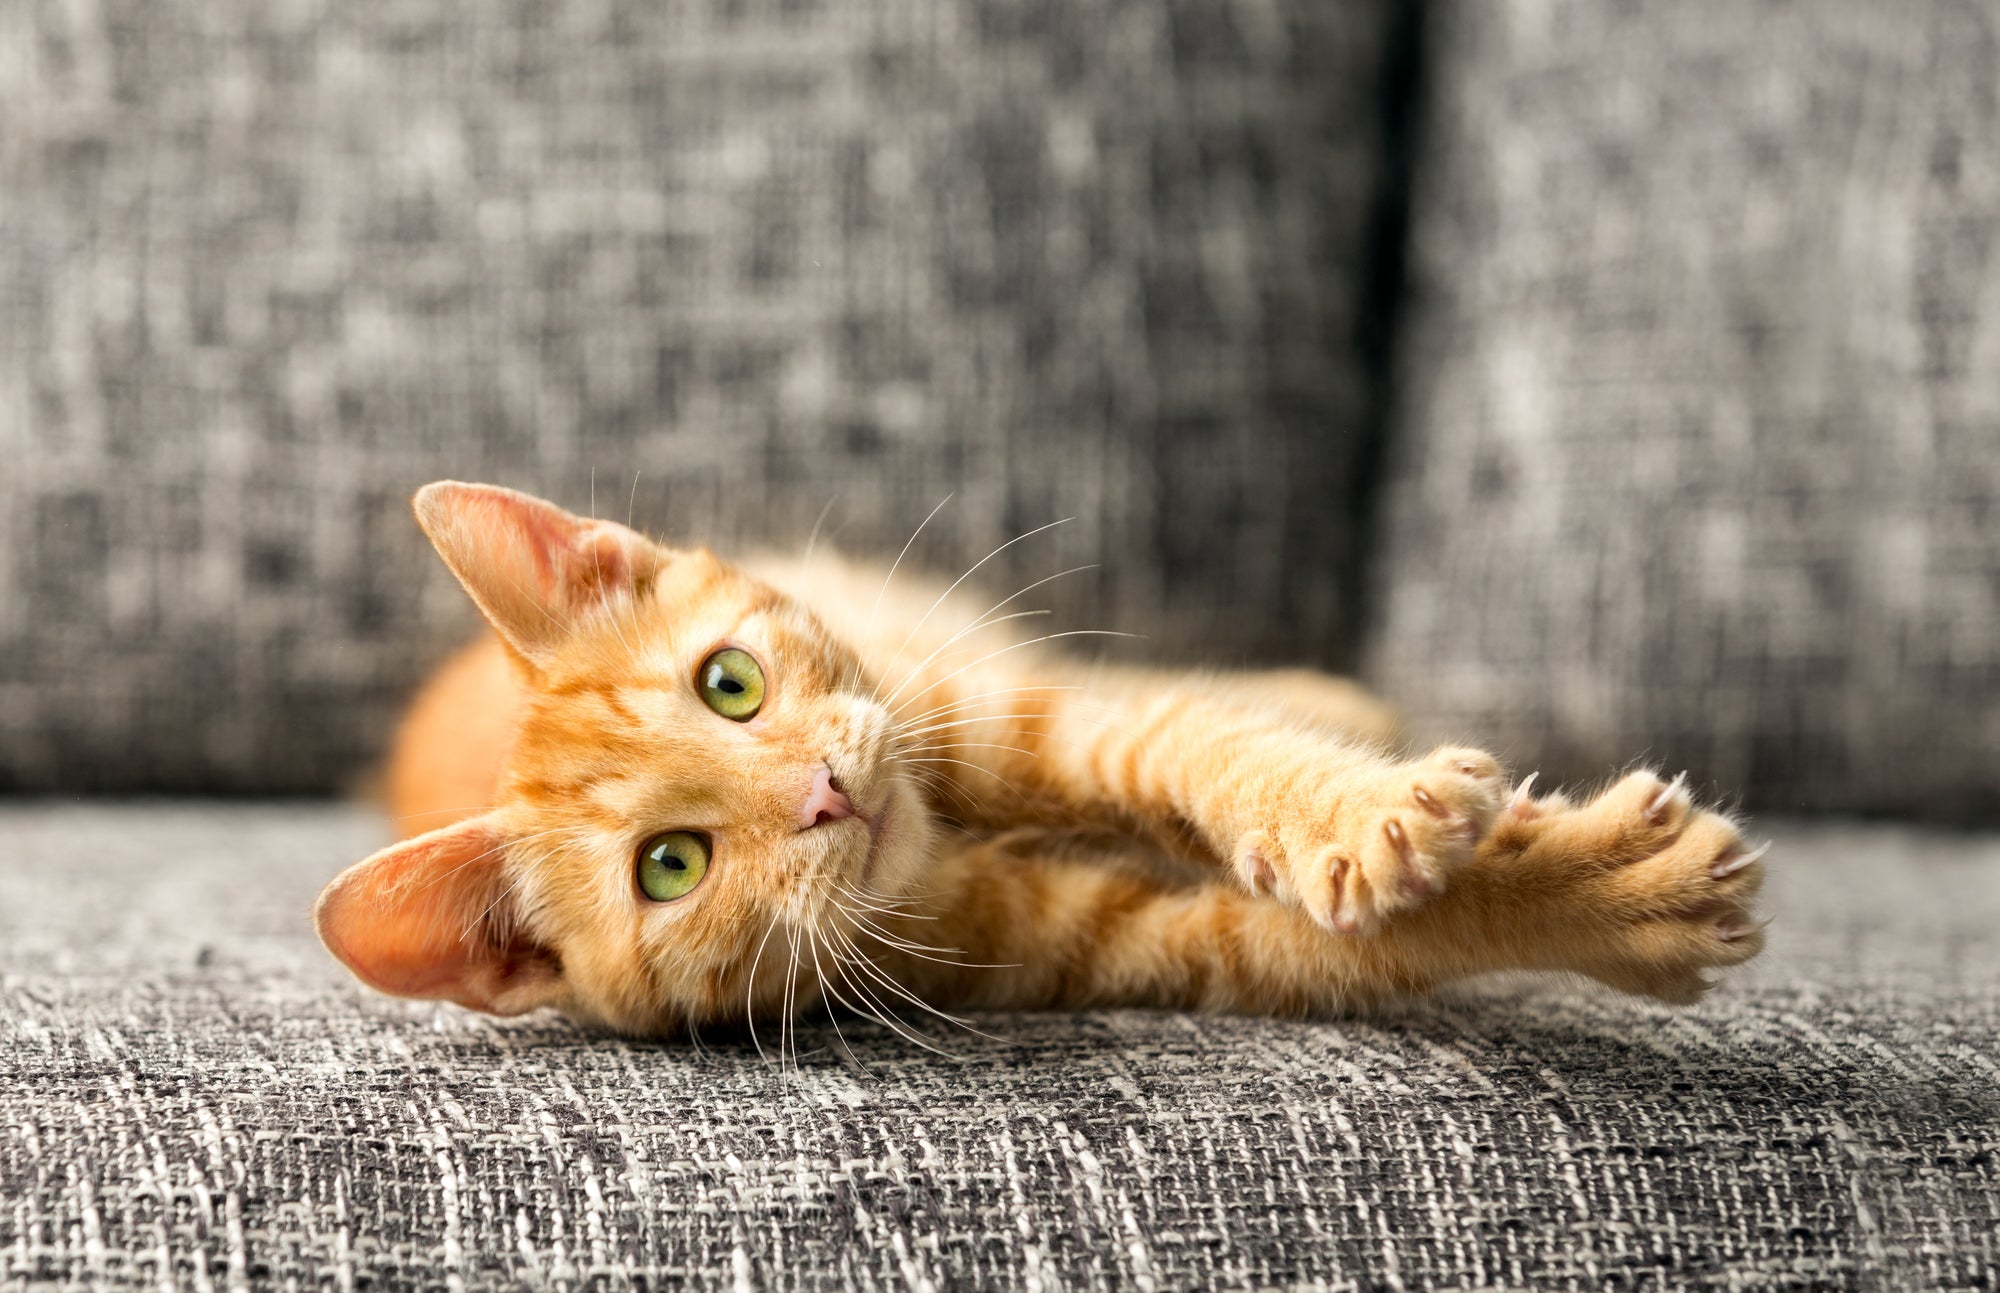 At What Age Do Cats Get Cancer? Find Out Now